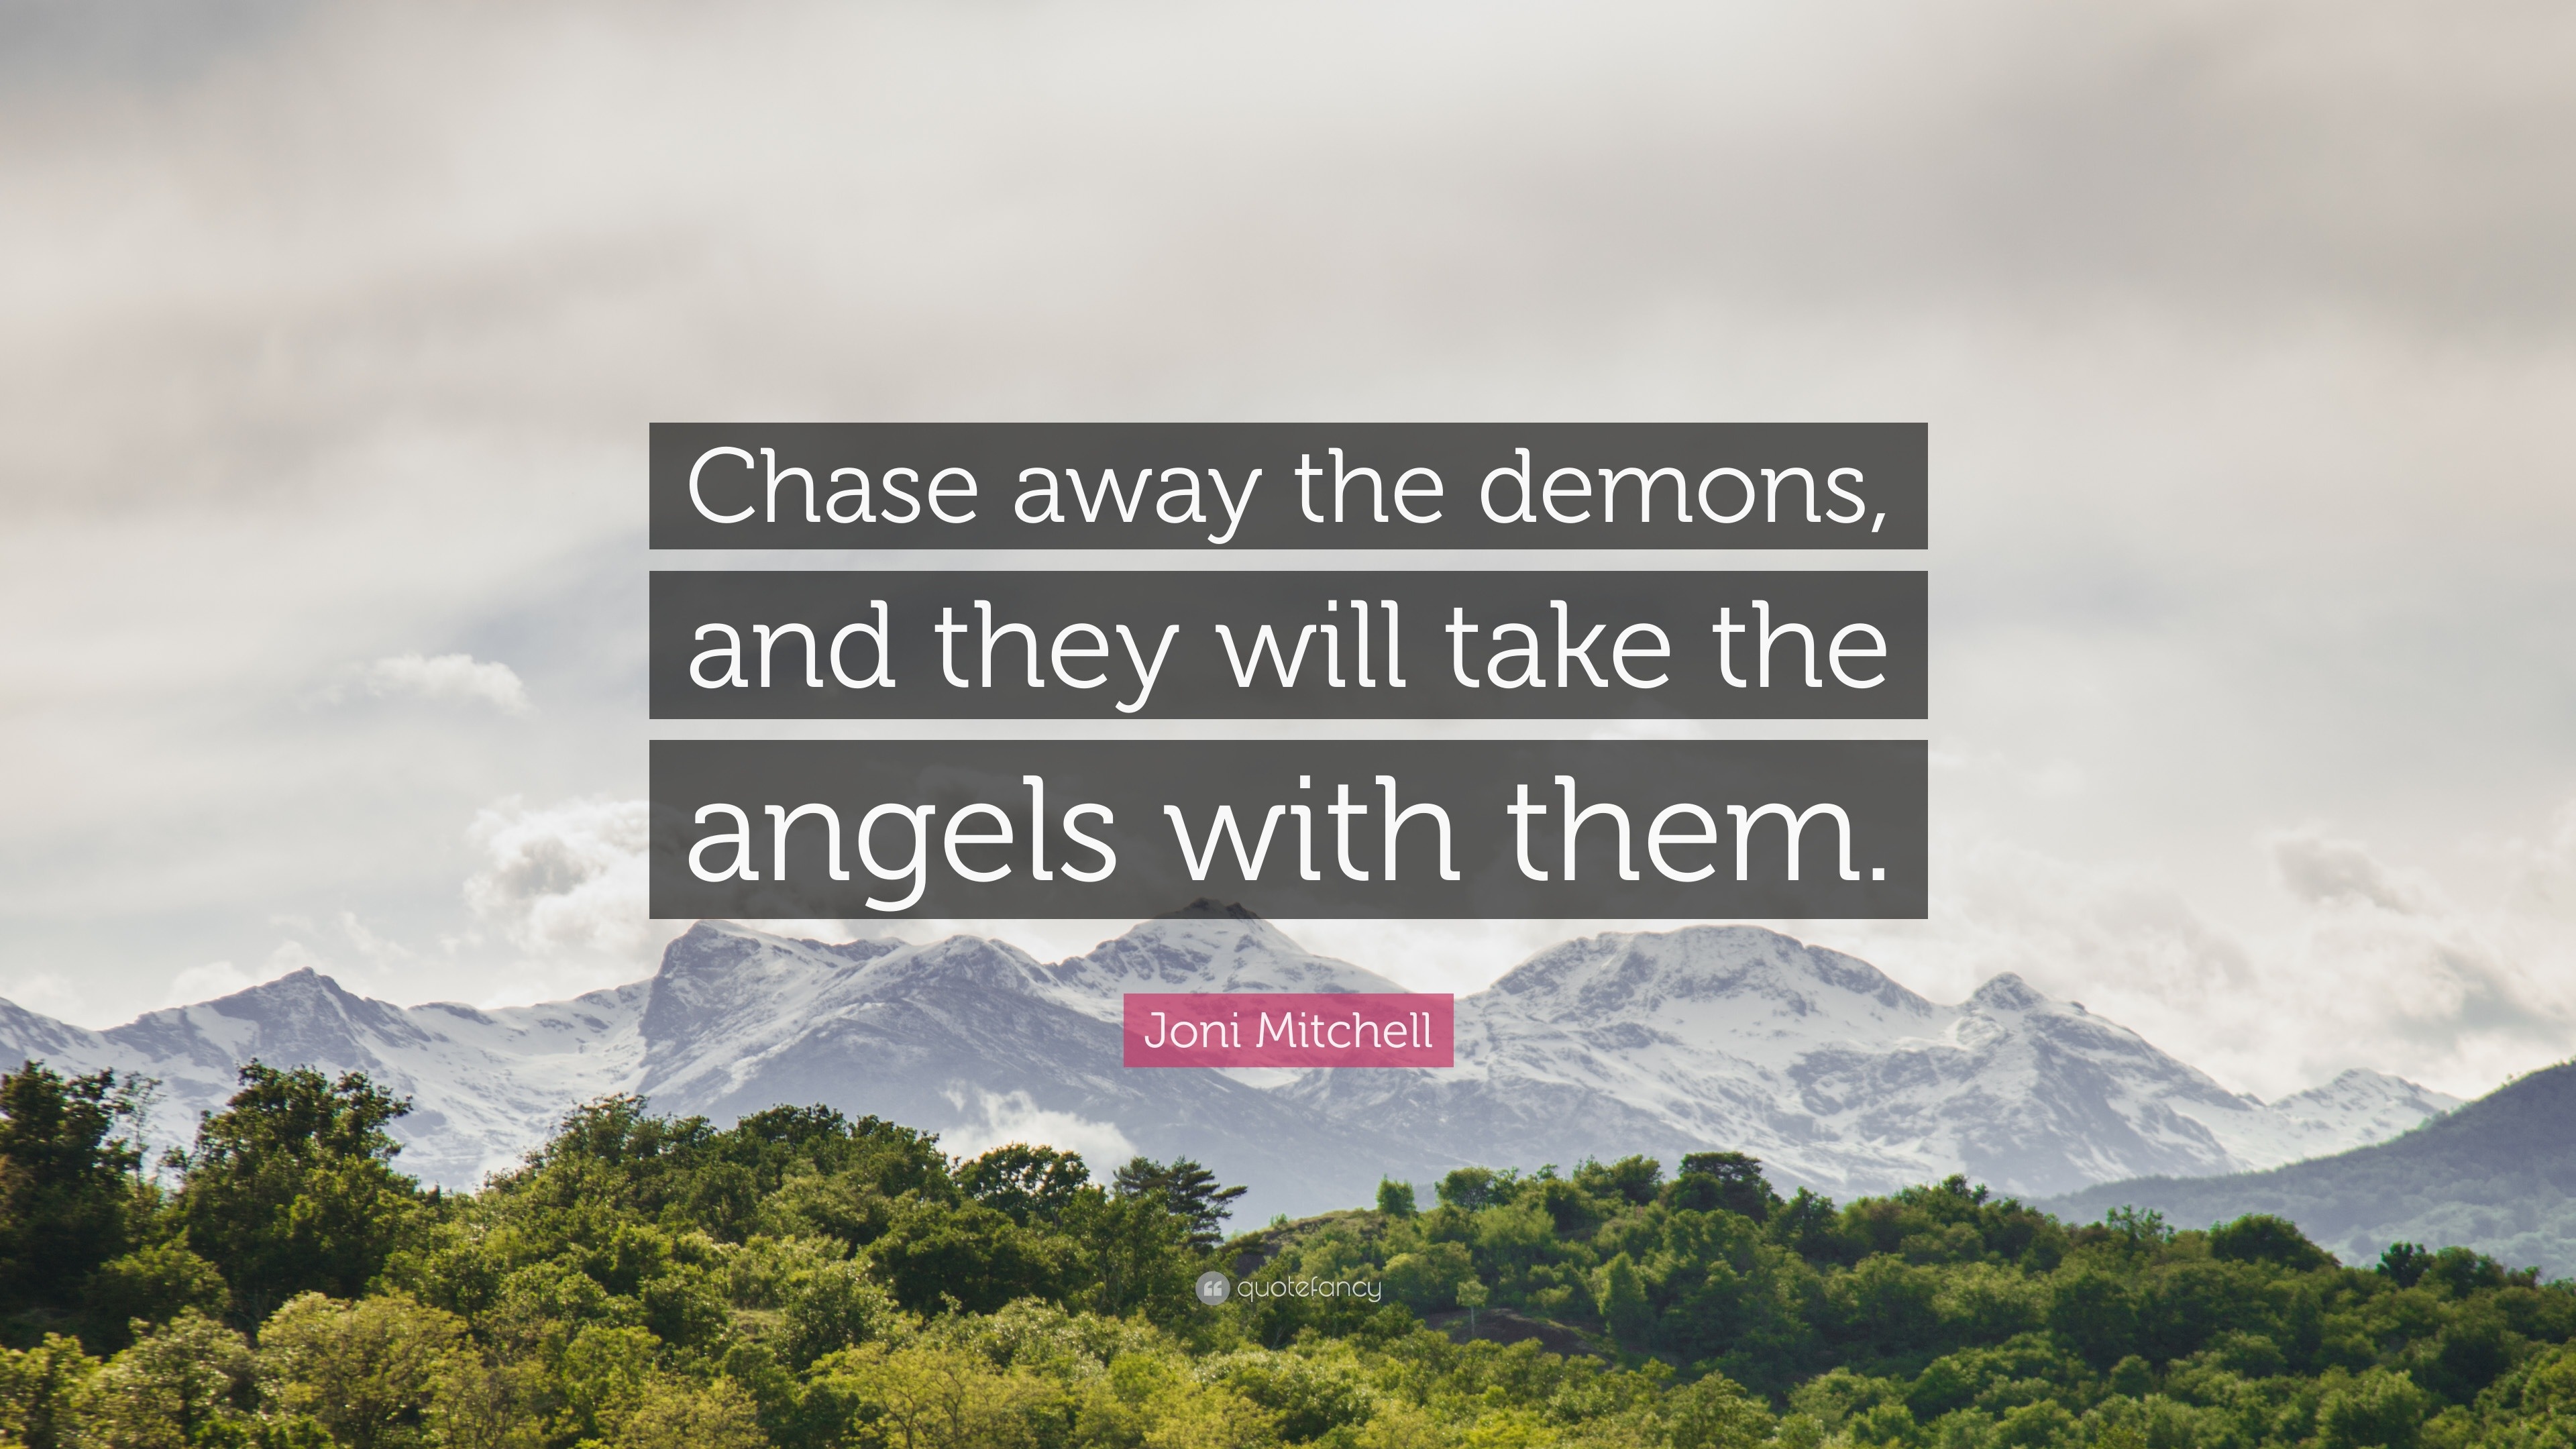 228 Angel Quotes & Sayings to Bring Out the Good